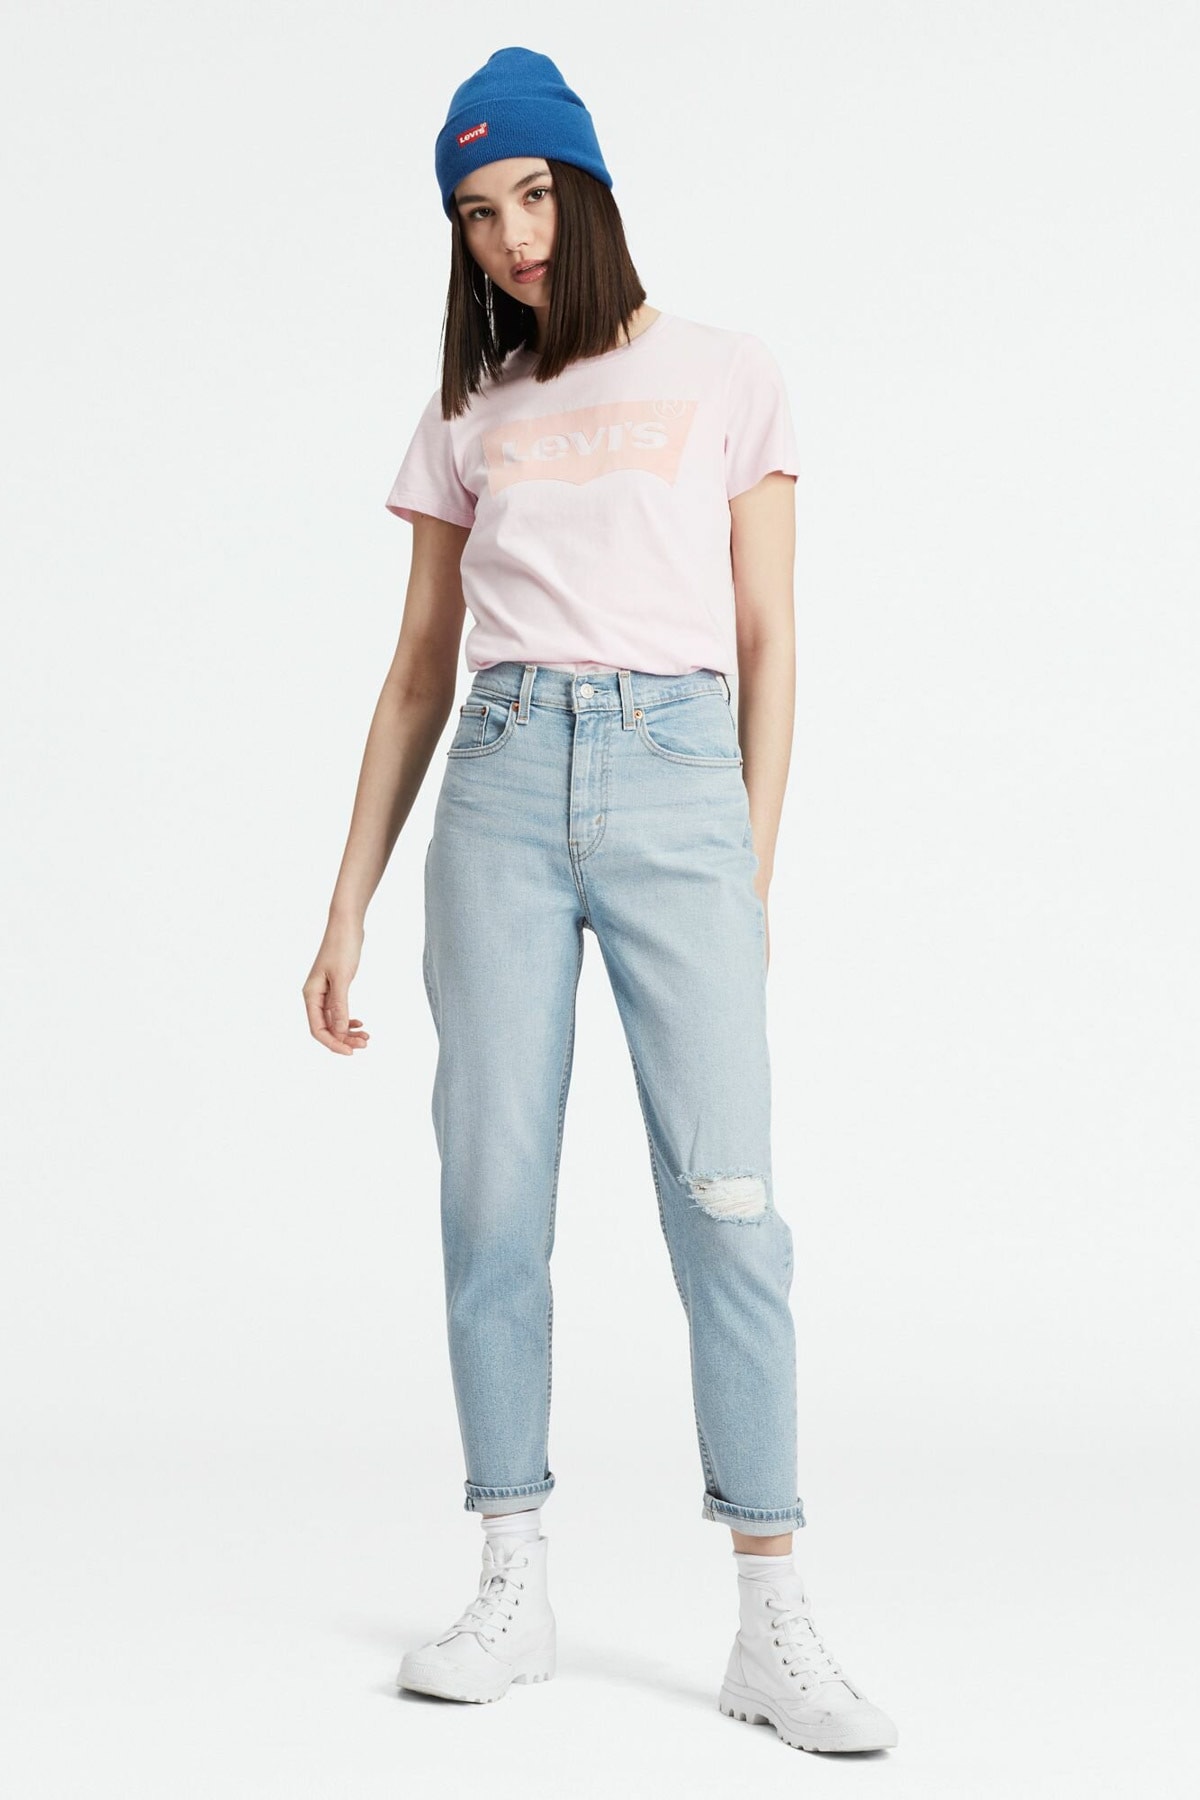 Levi's Mom Jeans Tapered Fit High Rise Ripped from the knee Women Jeans #  56778-0015 – Next Generation Secrets